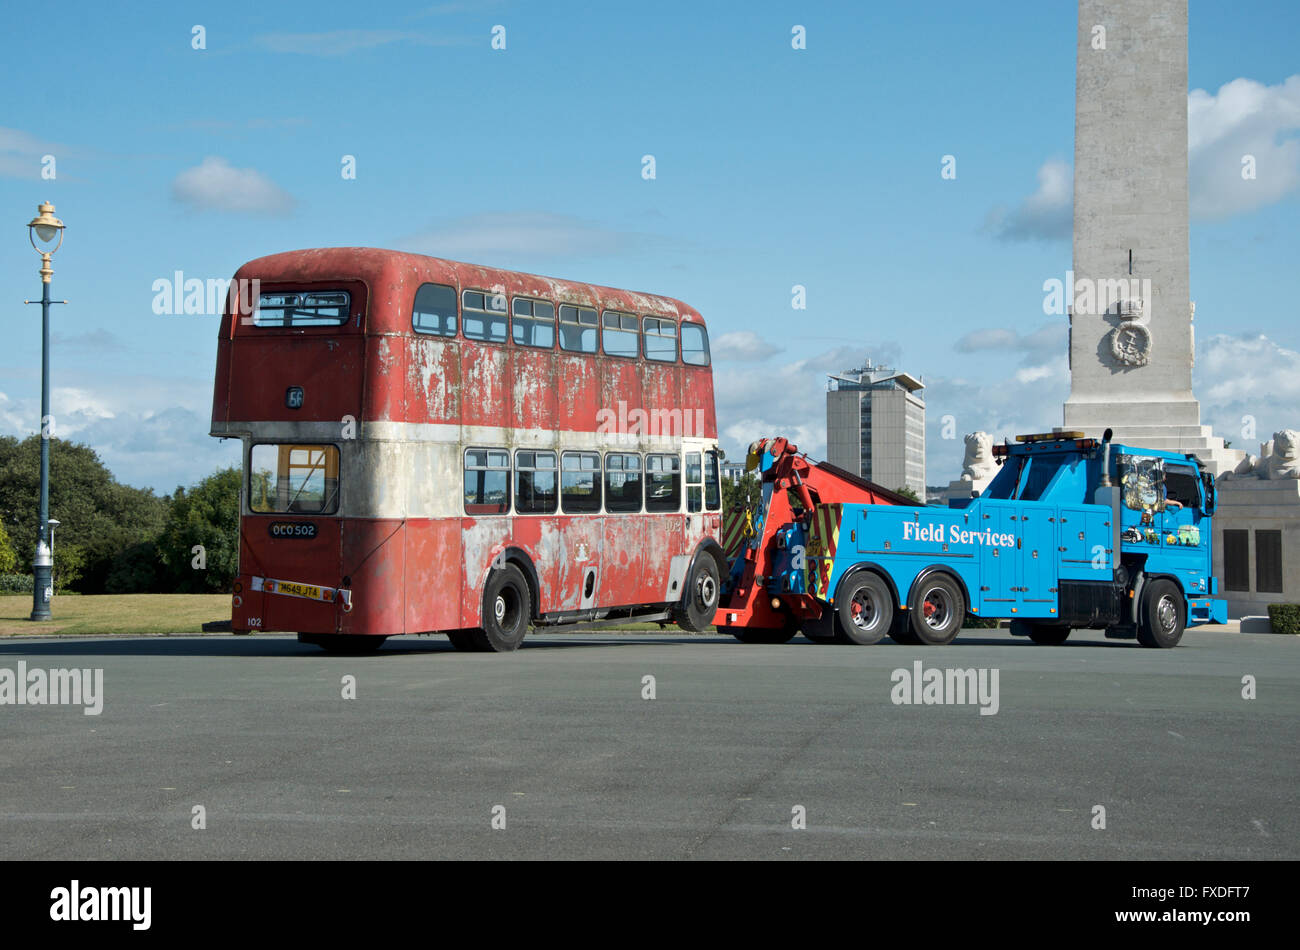 Old derelict red bus being towed. Stock Photo